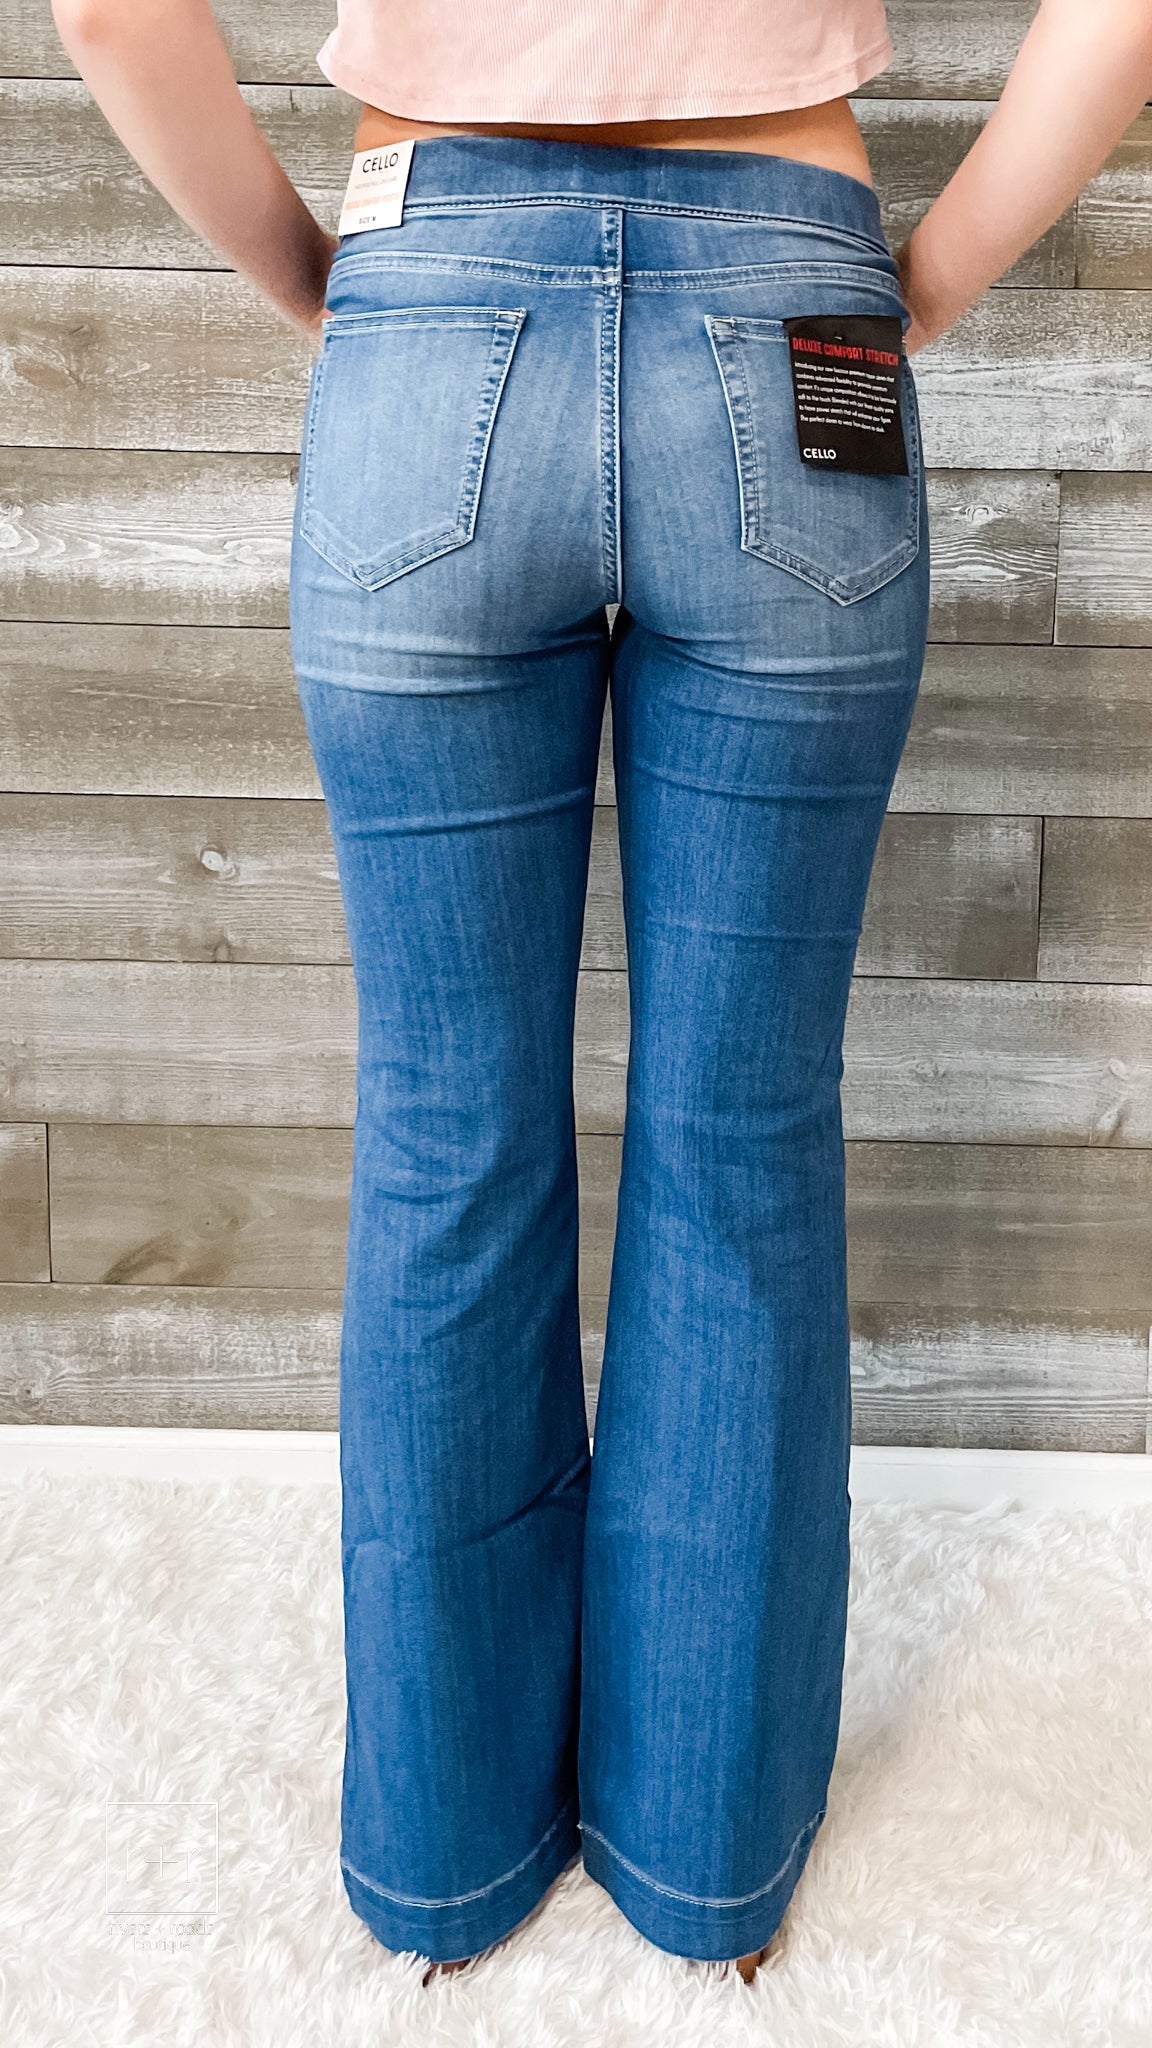 cello jeans mid rise pull on flare jegging AB35324 medium wash